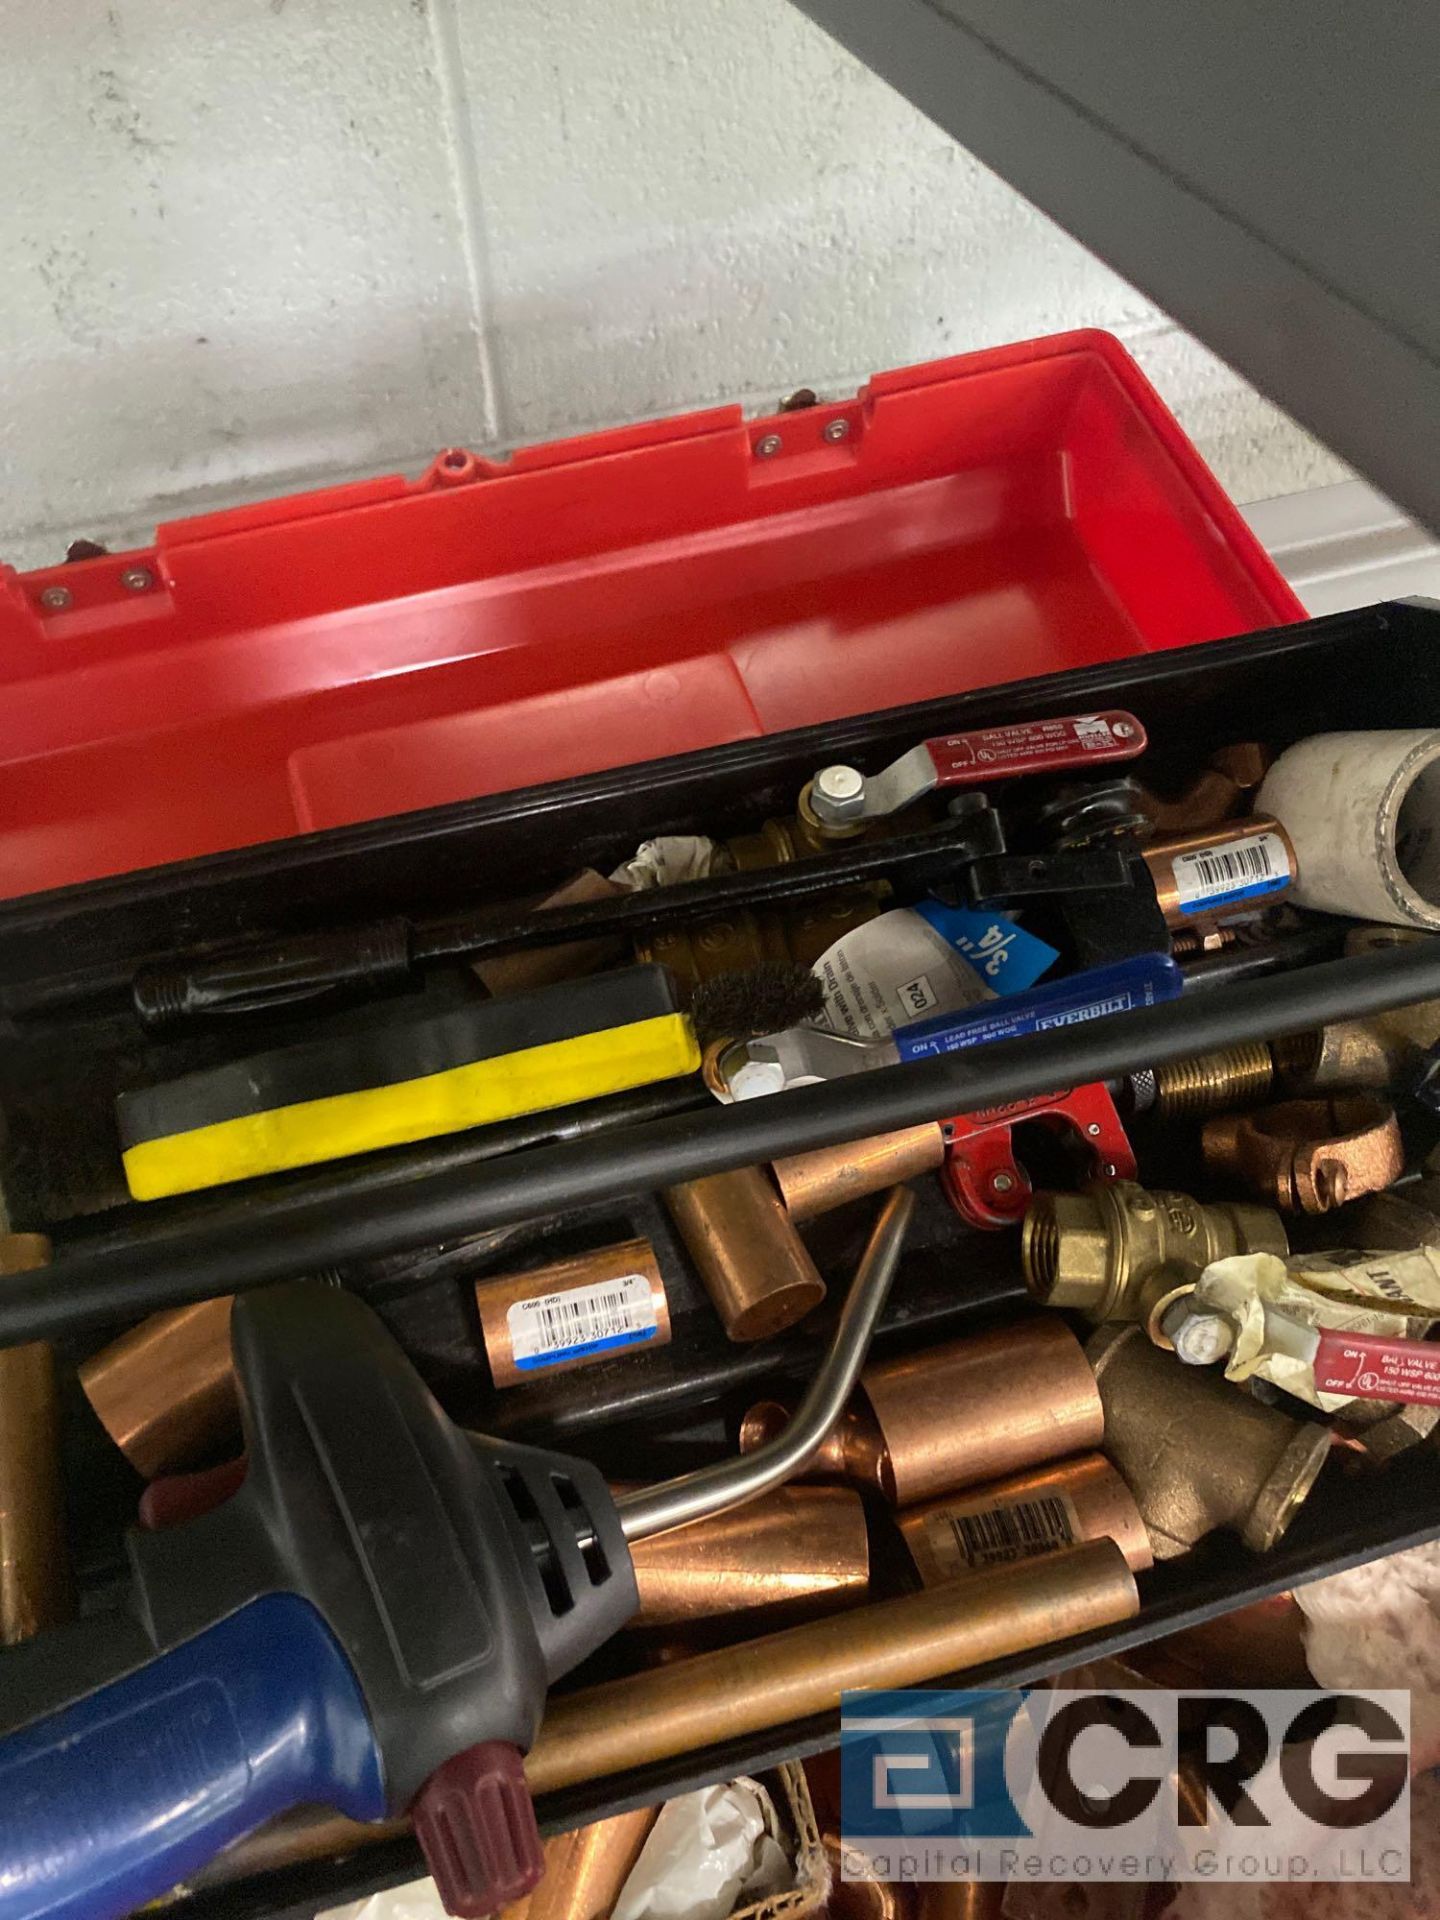 Plumbers tool box with assorted plumbing tools, pieces and materials, including bernzomatic torch - Image 5 of 5